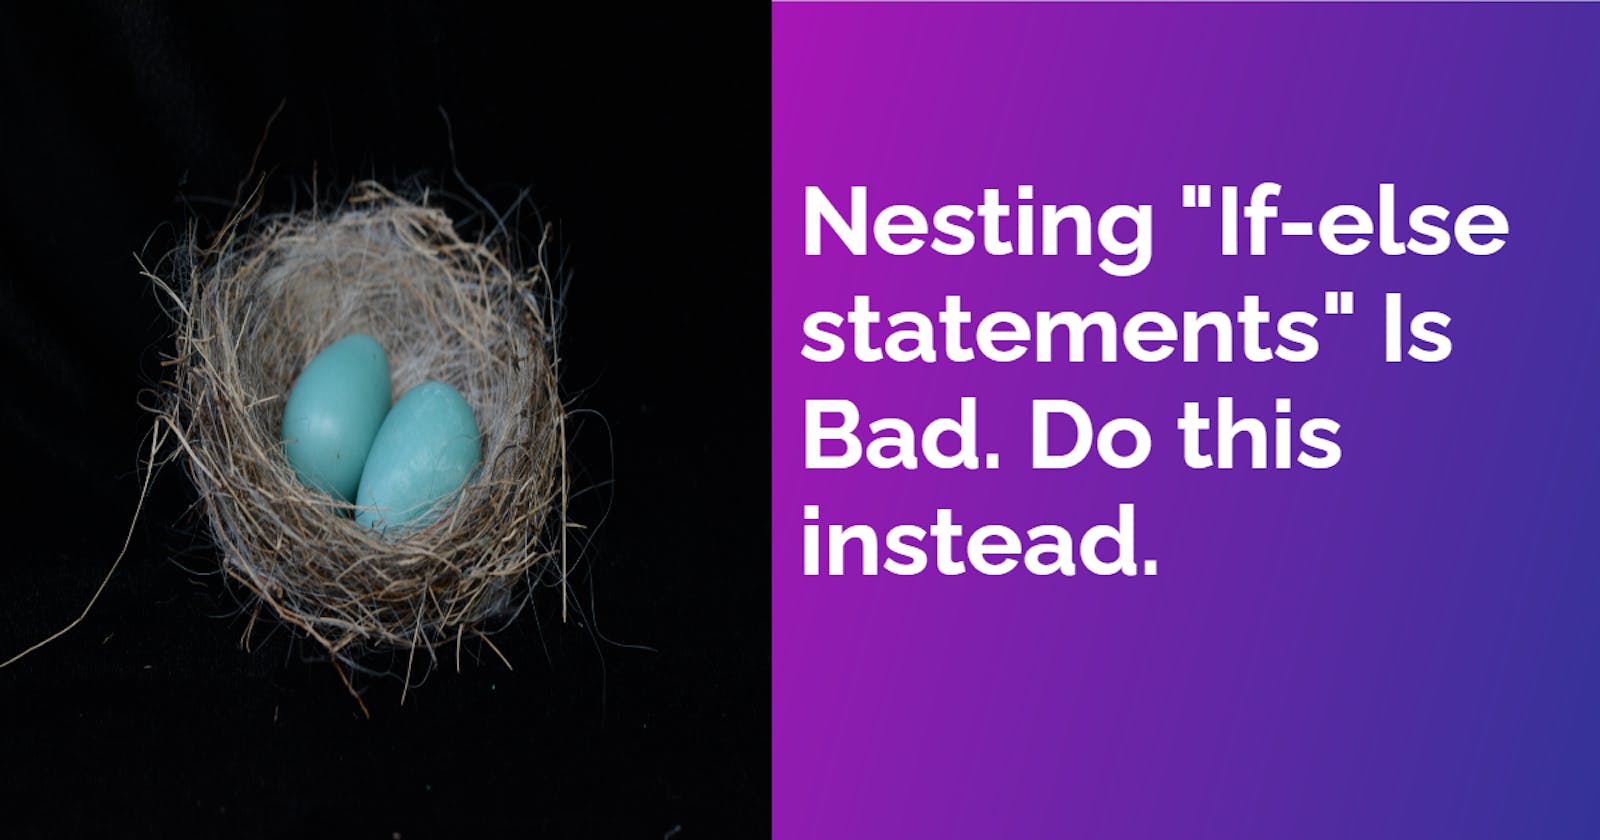 Nesting "If-else statements" Is Bad. Do this instead.